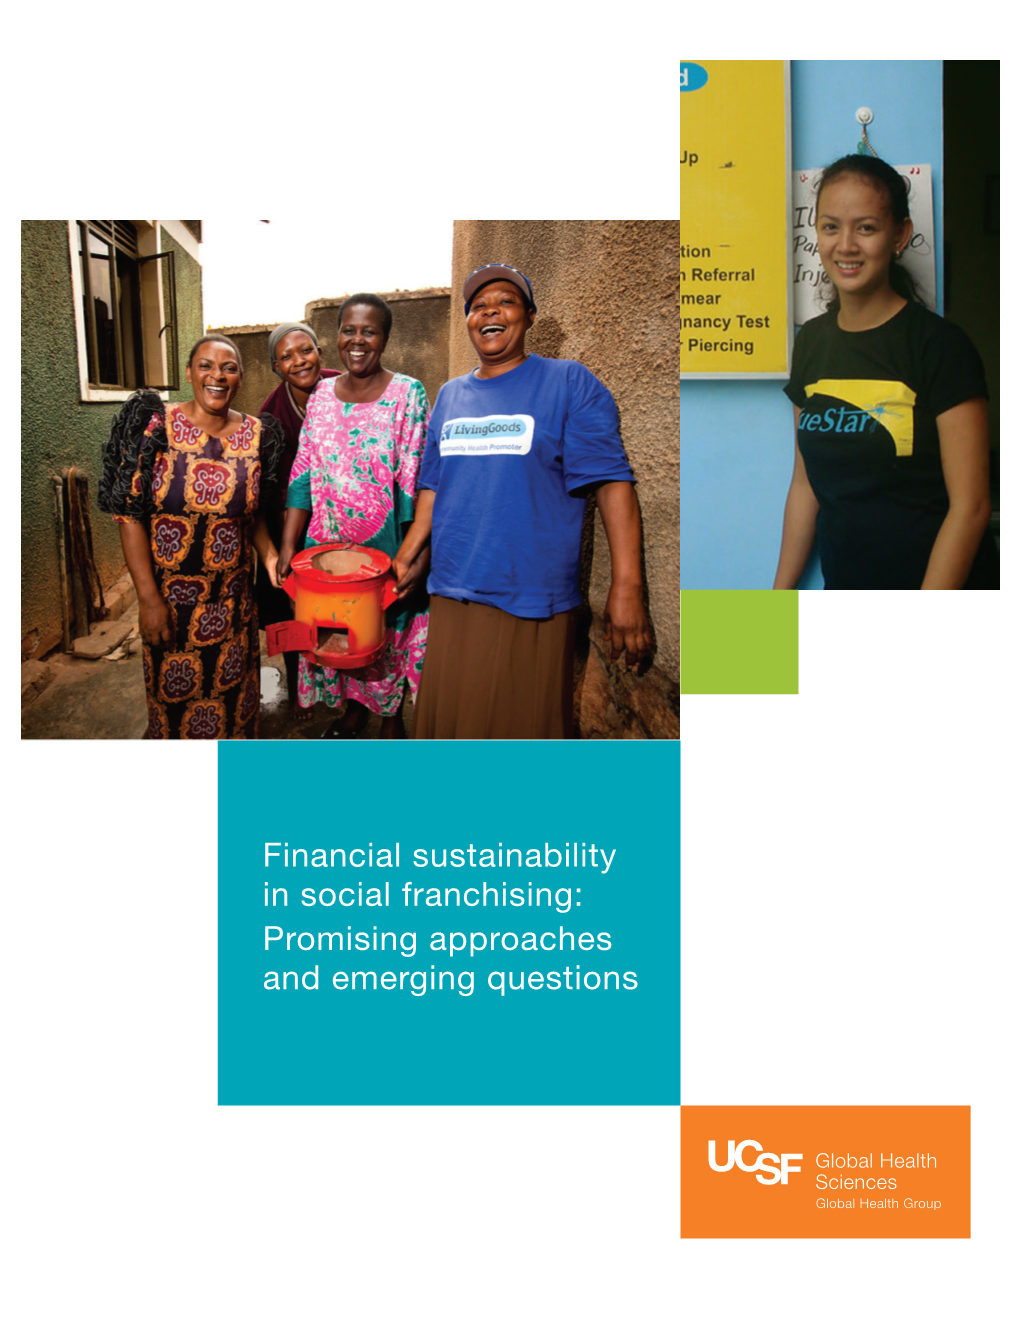 Financial Sustainability in Social Franchising: Promising Approaches